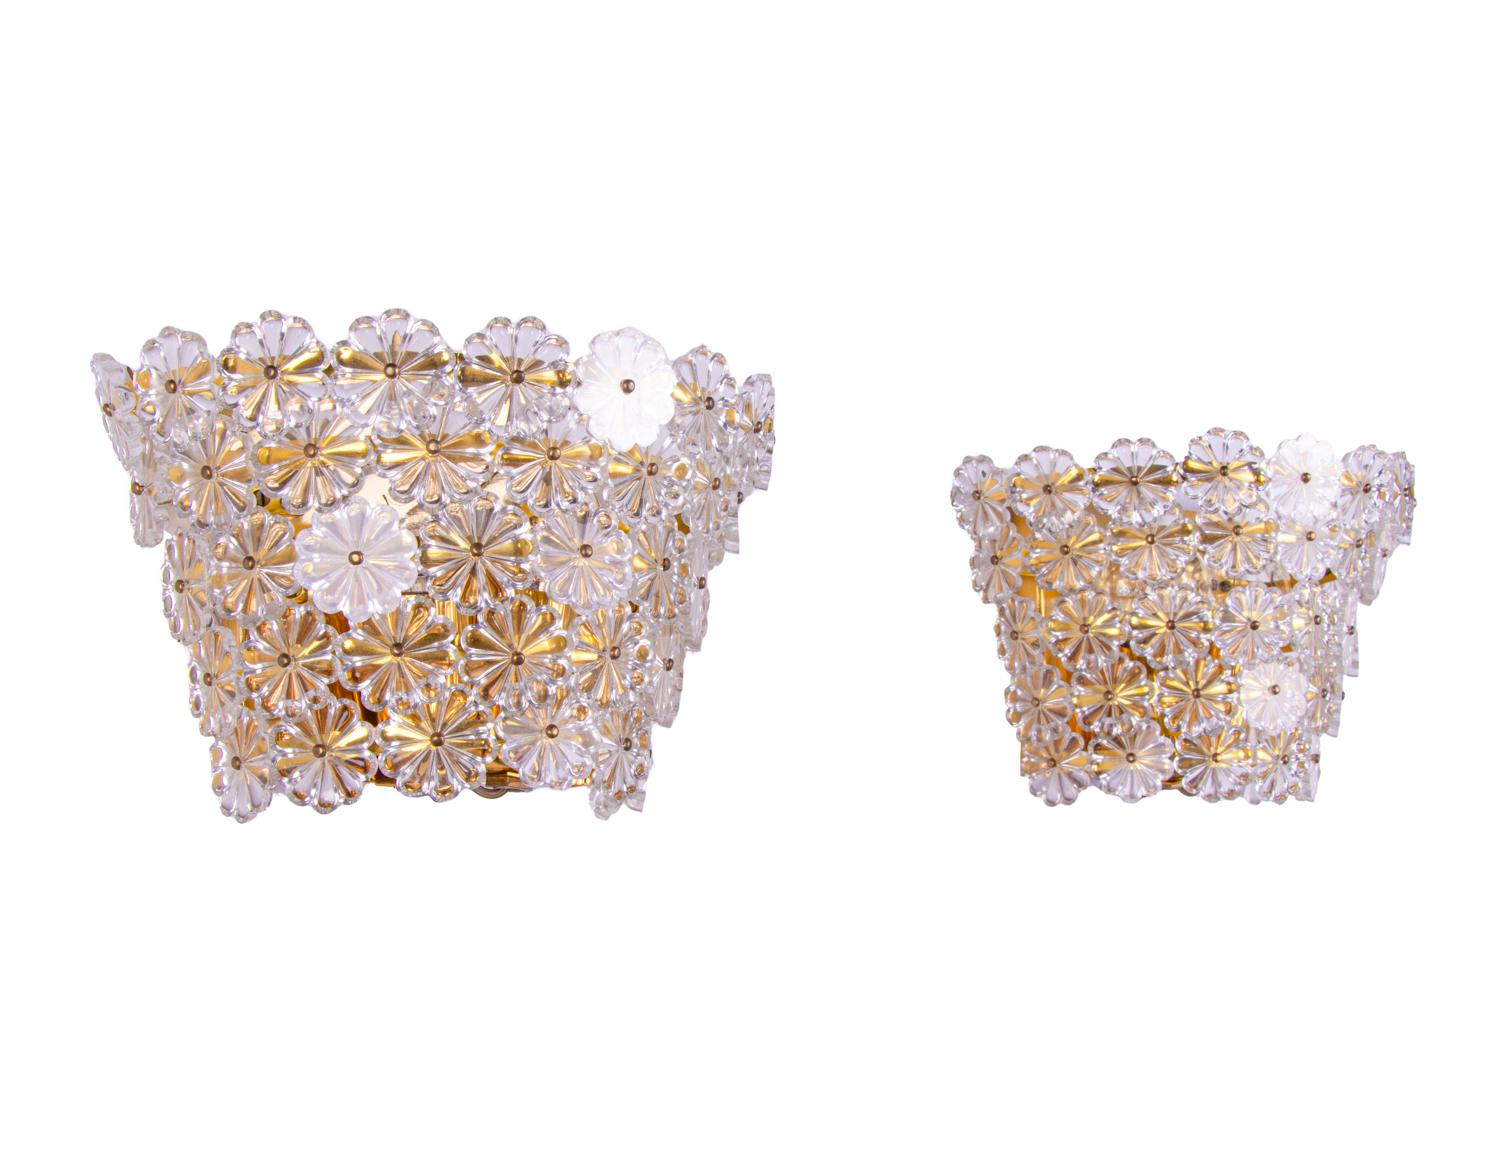 Austrian Pair of Gold-Plated Brass and Crystal Glass Wall Lamps Sconces by Emil Stejnar For Sale